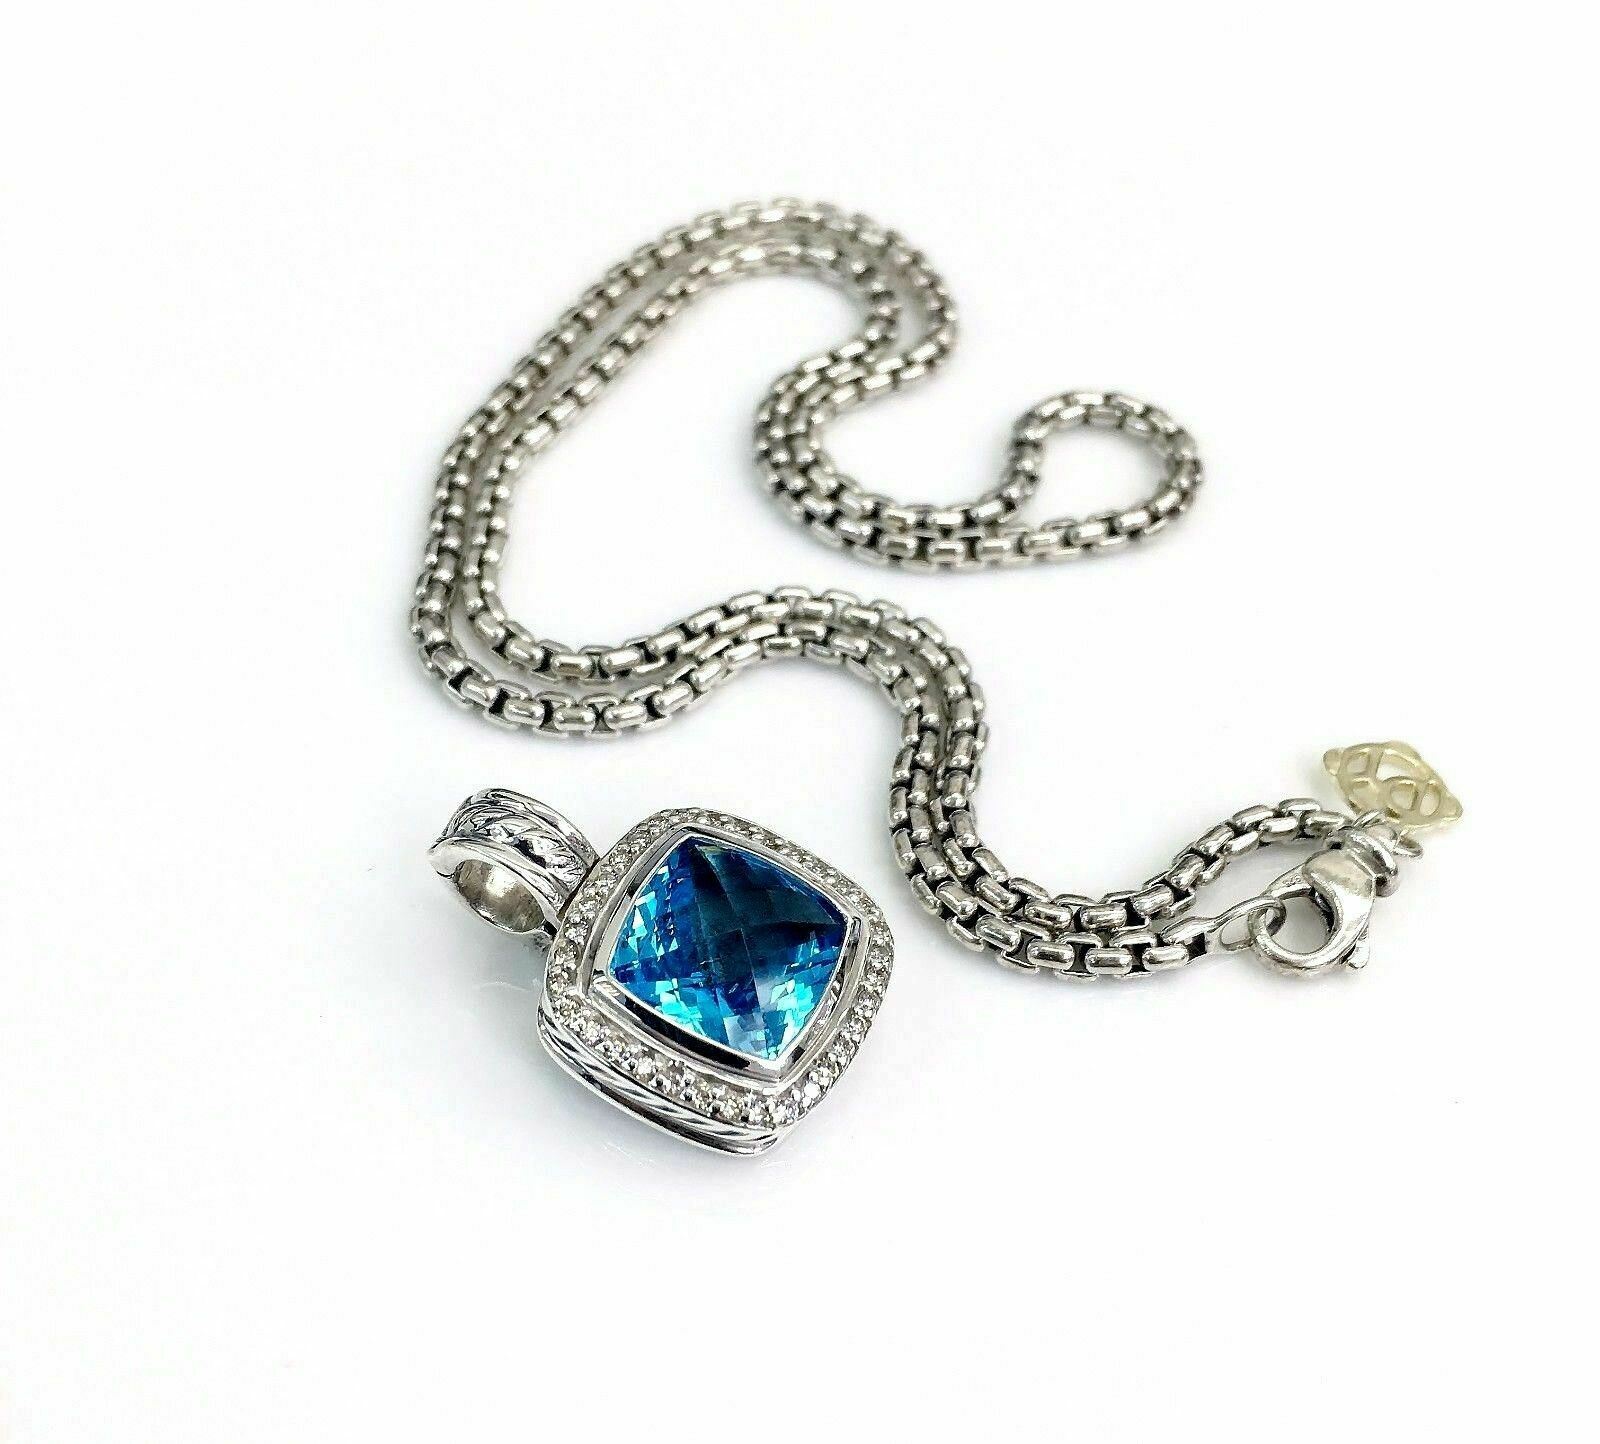 David Yurman Albion Diamond and Topaz Pendant with DY 14K and Sterlin Chain 16in